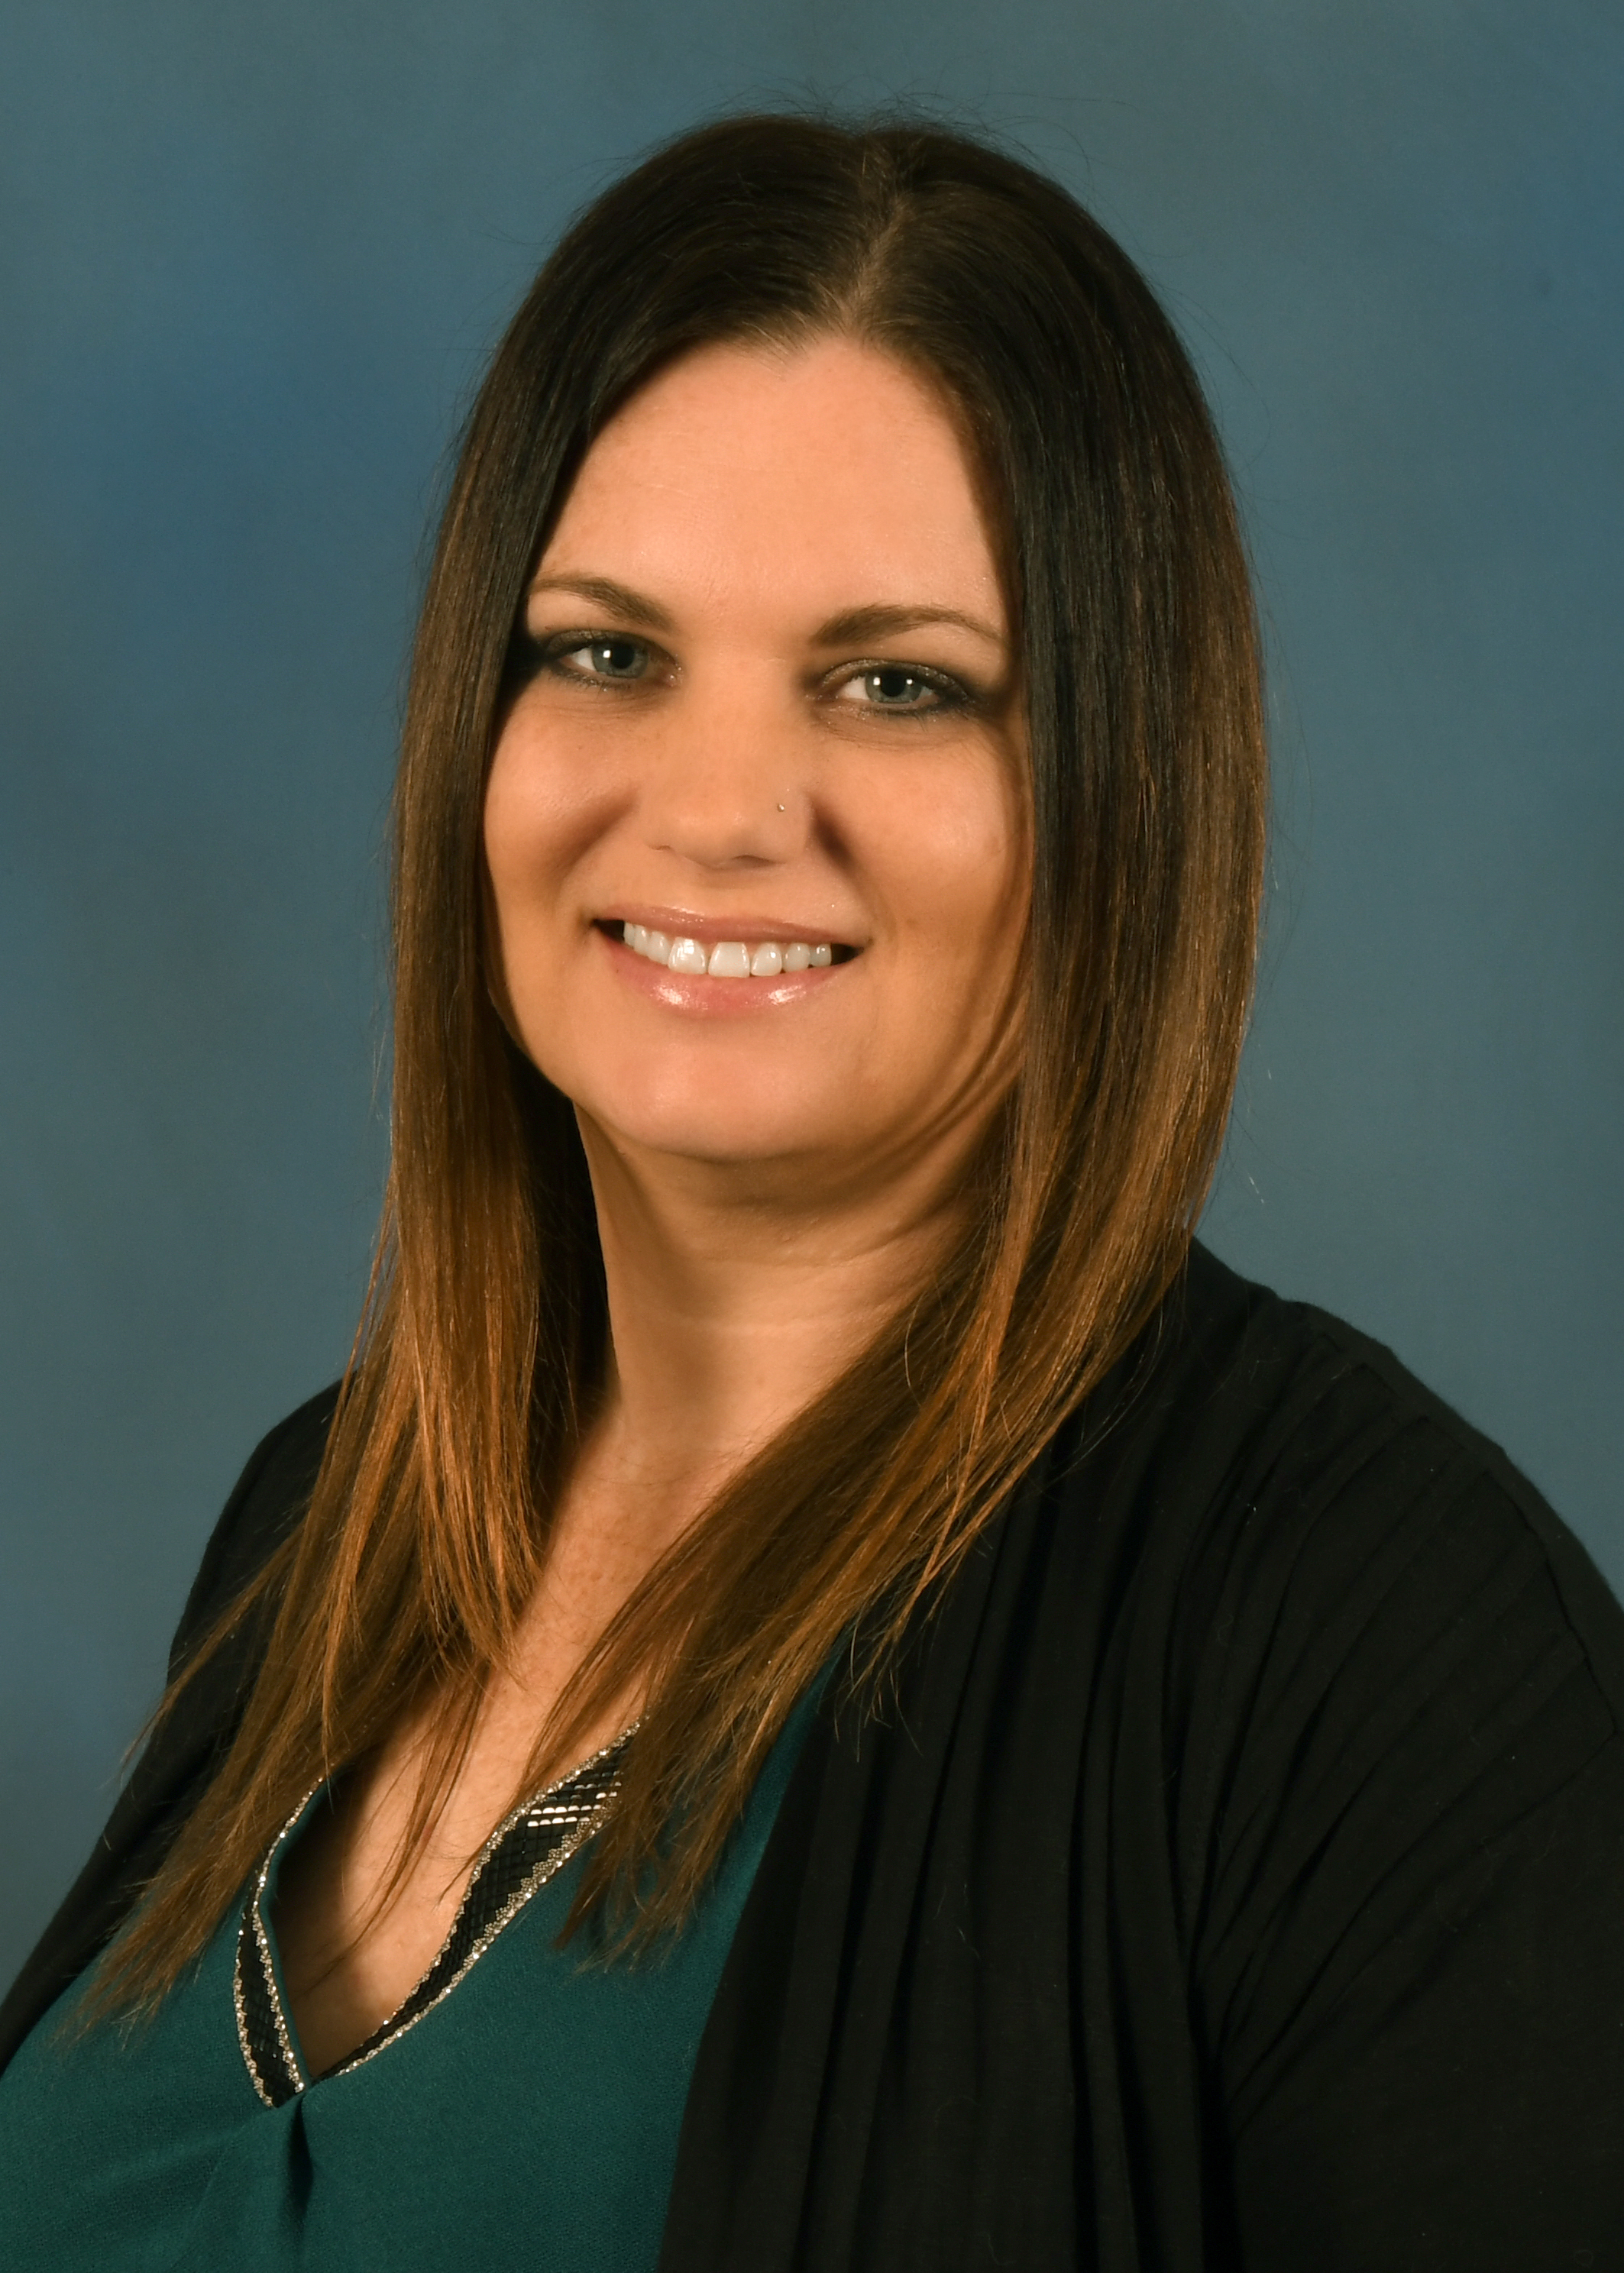 Amber Bradley - Deputy tax collector for customer care and communications